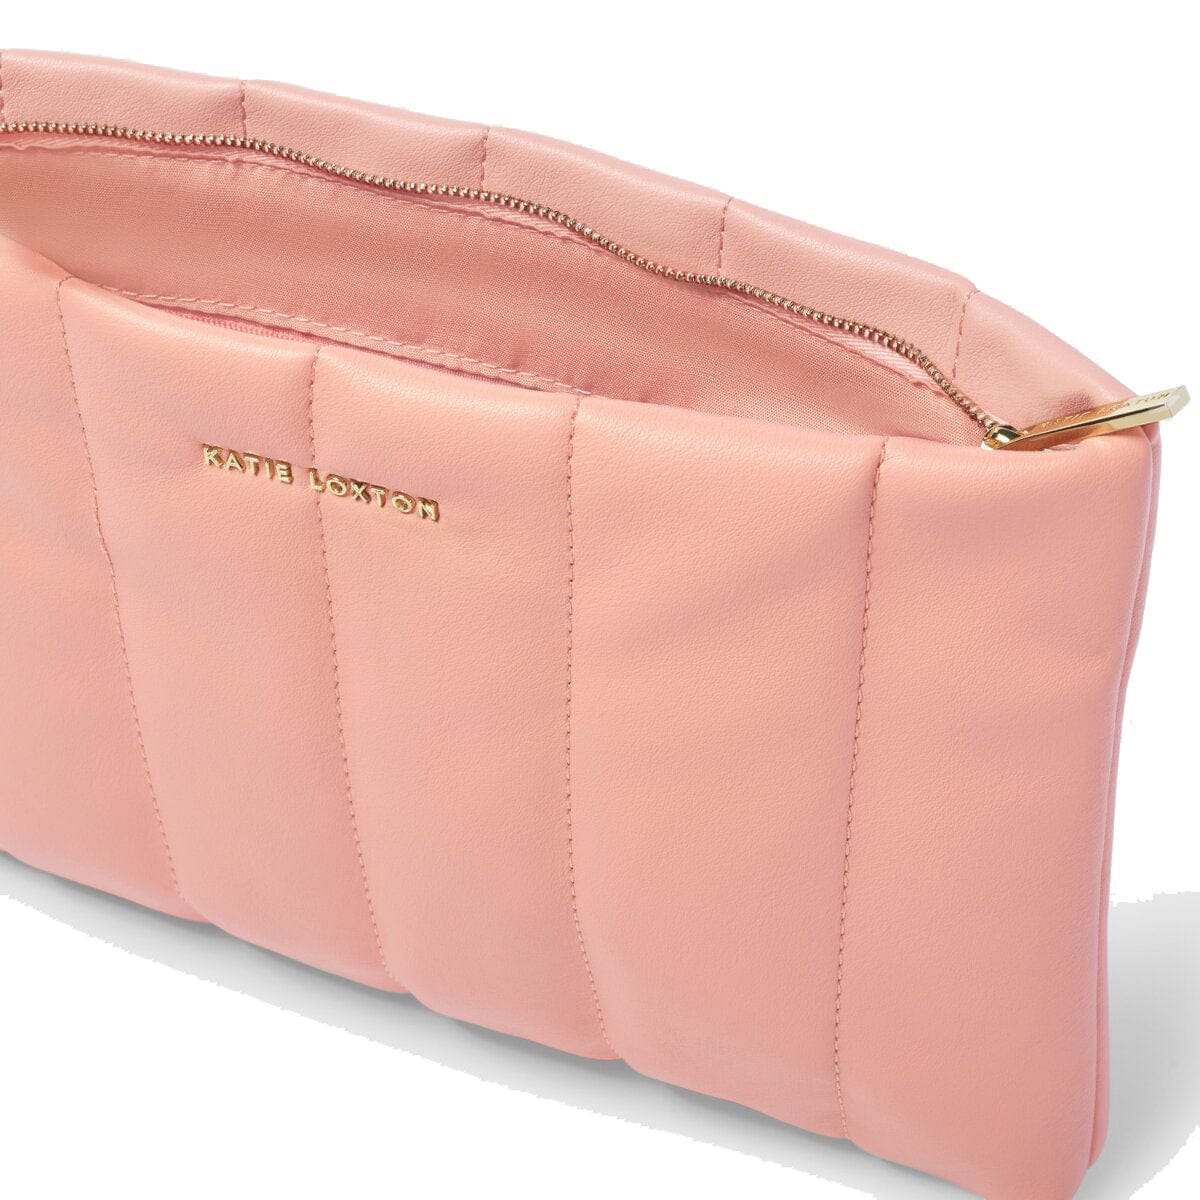 Katie Loxton Clutch Bag Katie Loxton Kendra Quilted Clutch Bag - Coral / Beige / Olive